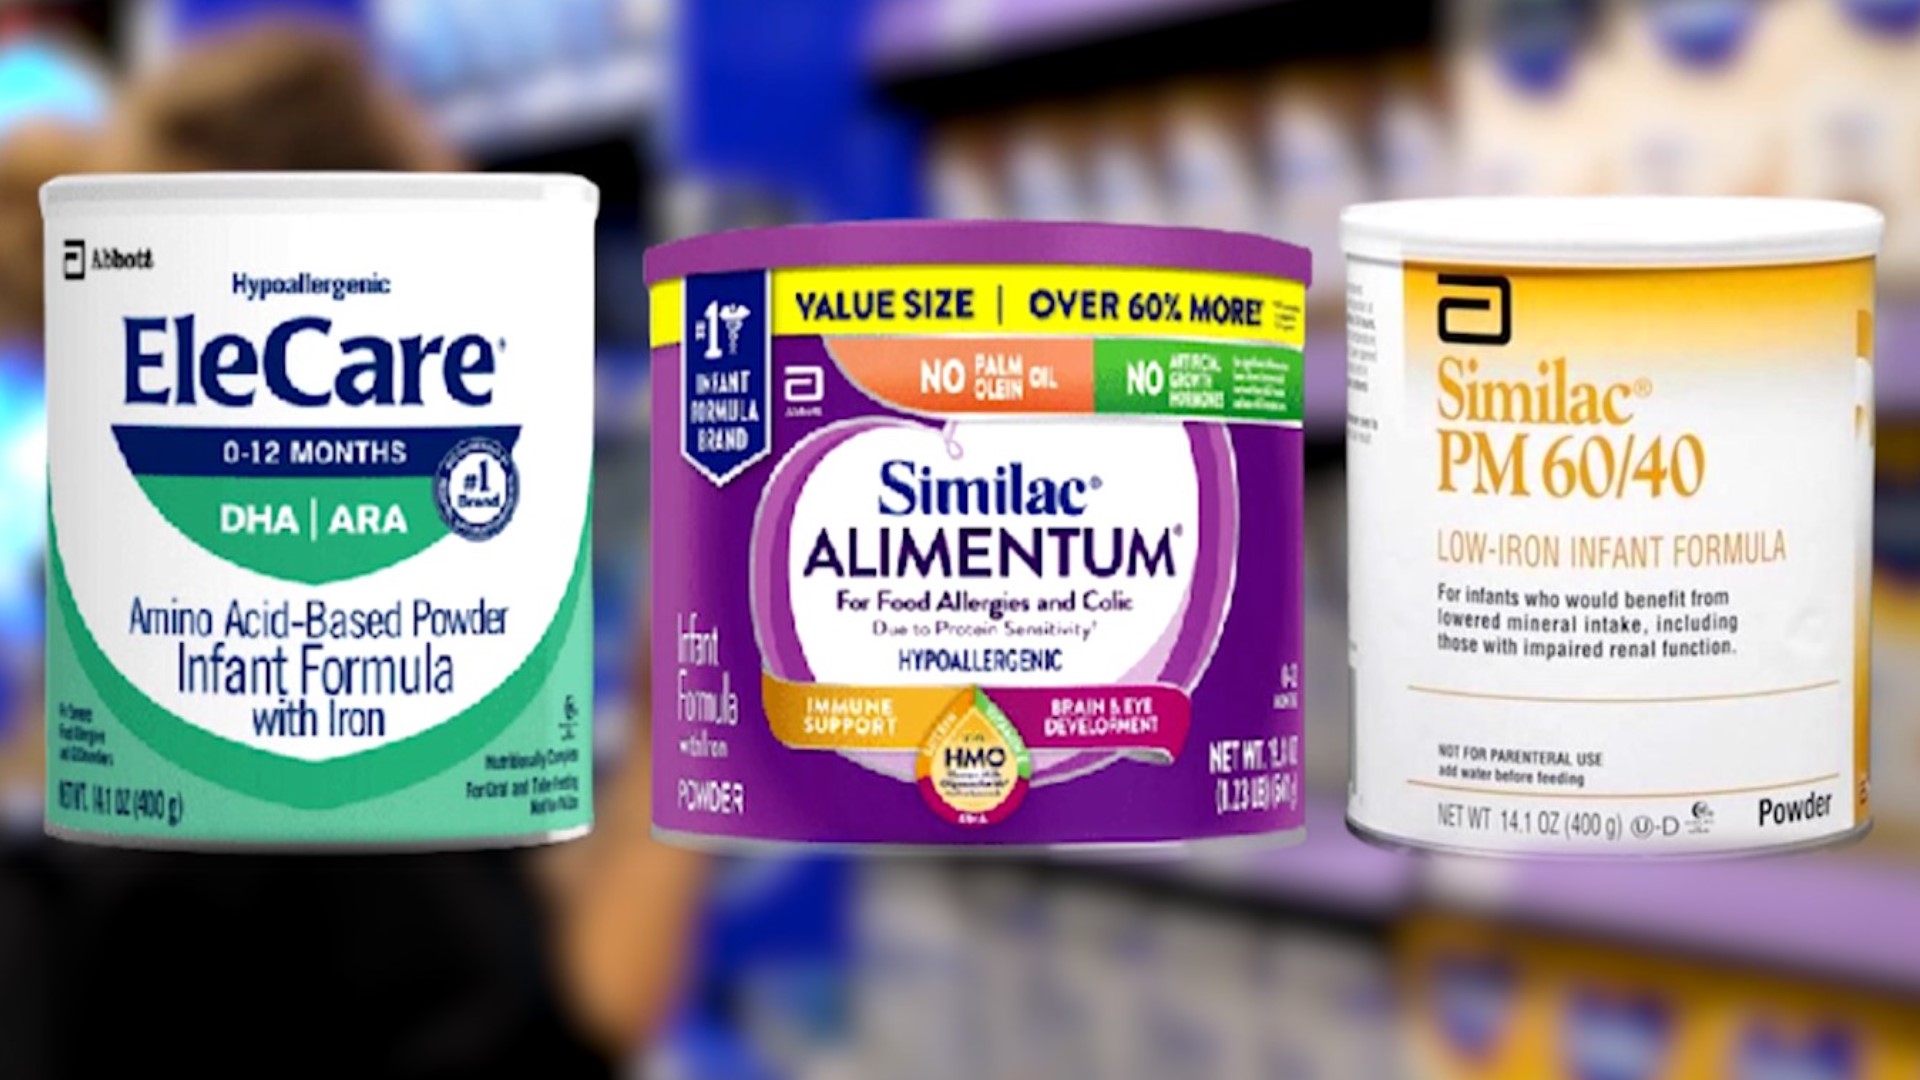 More than a month after a major recall involving baby formula, parents and caregivers say finding food for their babies is becoming even more difficult.